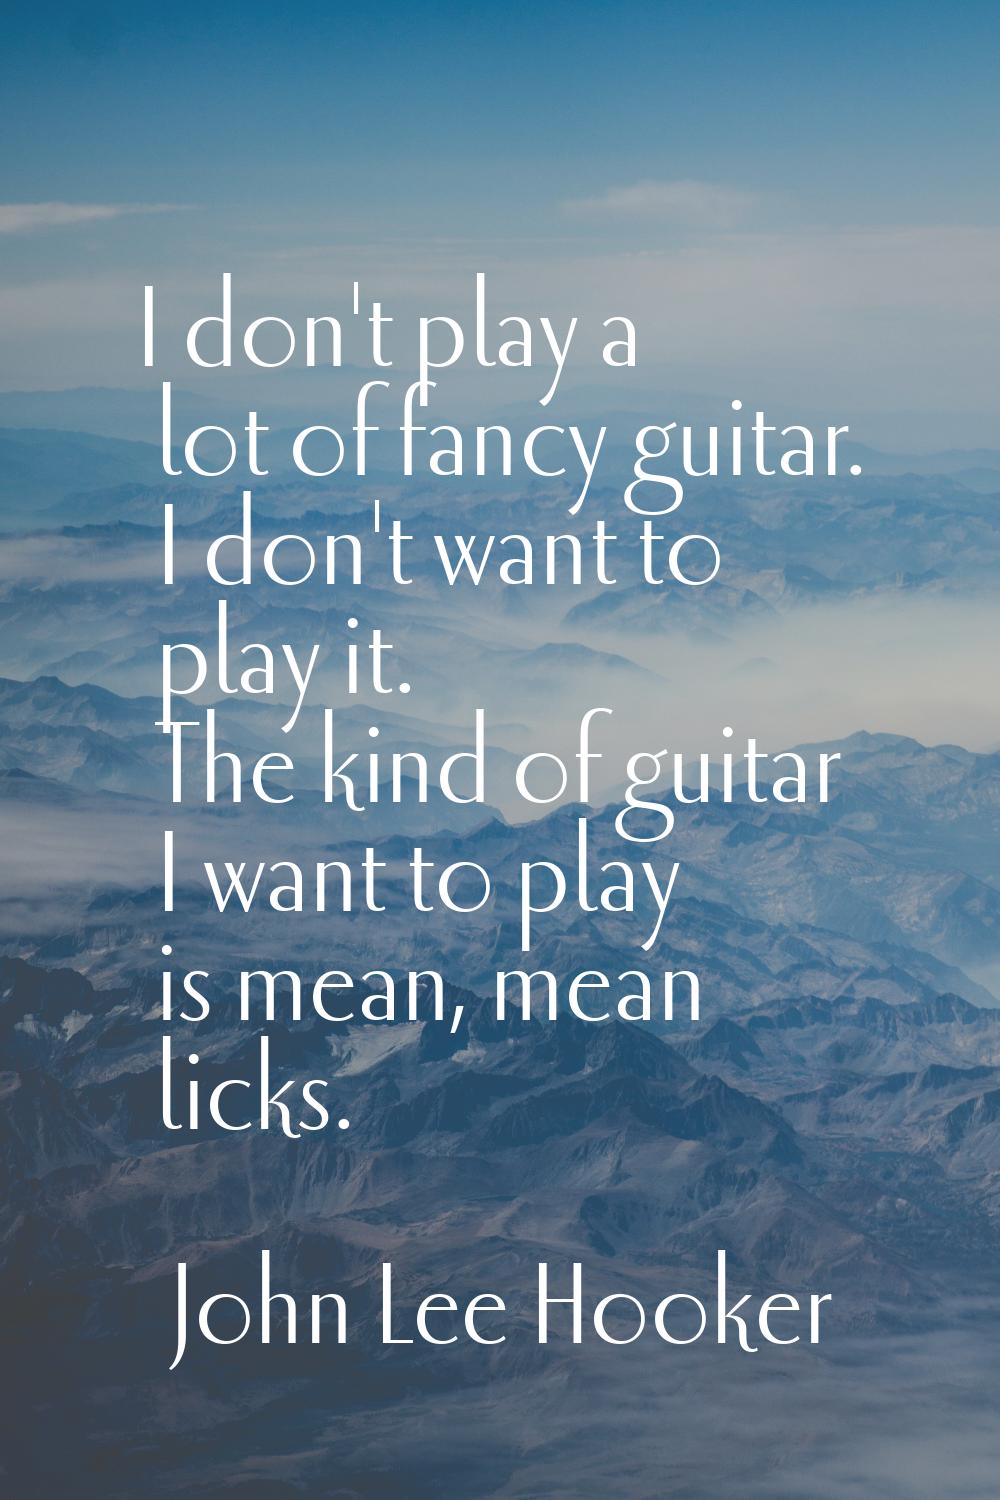 I don't play a lot of fancy guitar. I don't want to play it. The kind of guitar I want to play is m